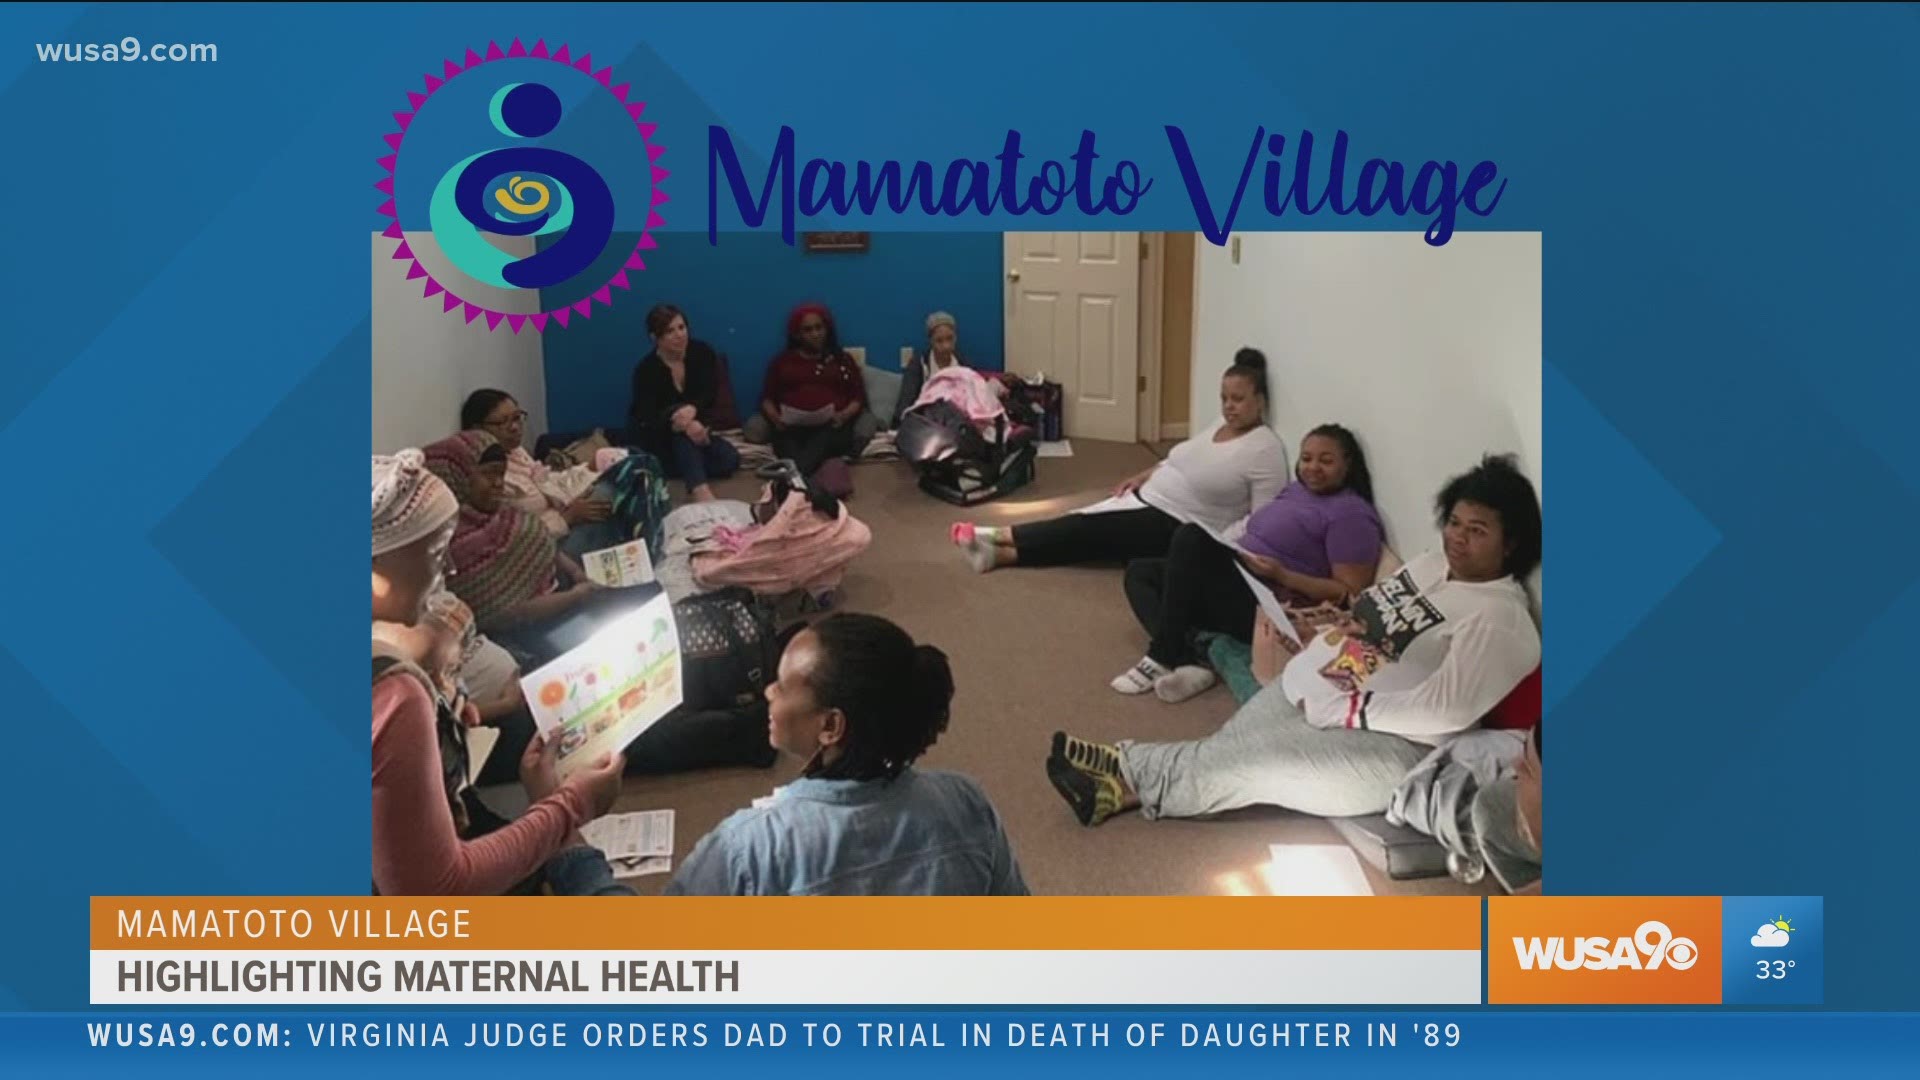 Aza Nedhari, Founder & Executive Director of Mamatoto Village shares their mission for maternal health awareness and support.